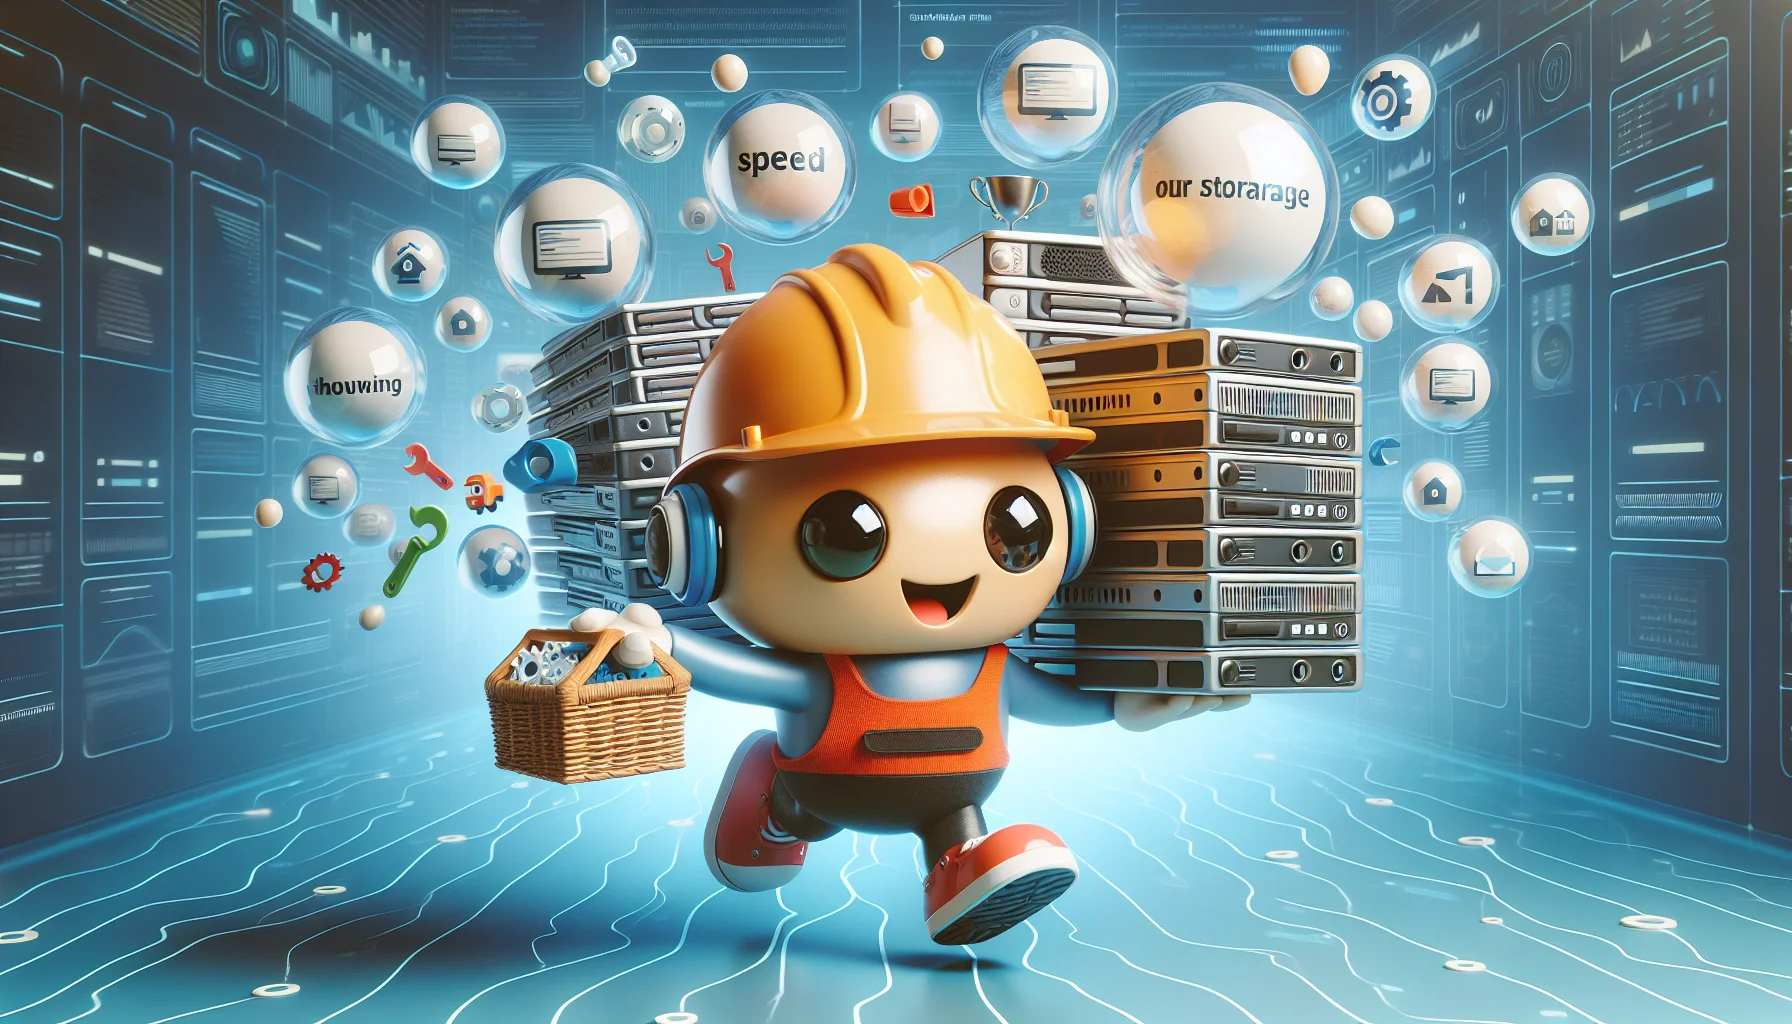 Create a humorous and realistic representation of an inexpensive website builder tool. Let us imagine it as a small, charming robot with a construction hat. It's energetically and merrily hoarding a plethora of website components remarking the wide variety of web hosting options. All around it are floating bubbles, each symbolizing different web hosting features like speed, storage, and customer support. In the background, there's an ever-evolving digital landscape symbolizing future expansion and potential growth of the website.